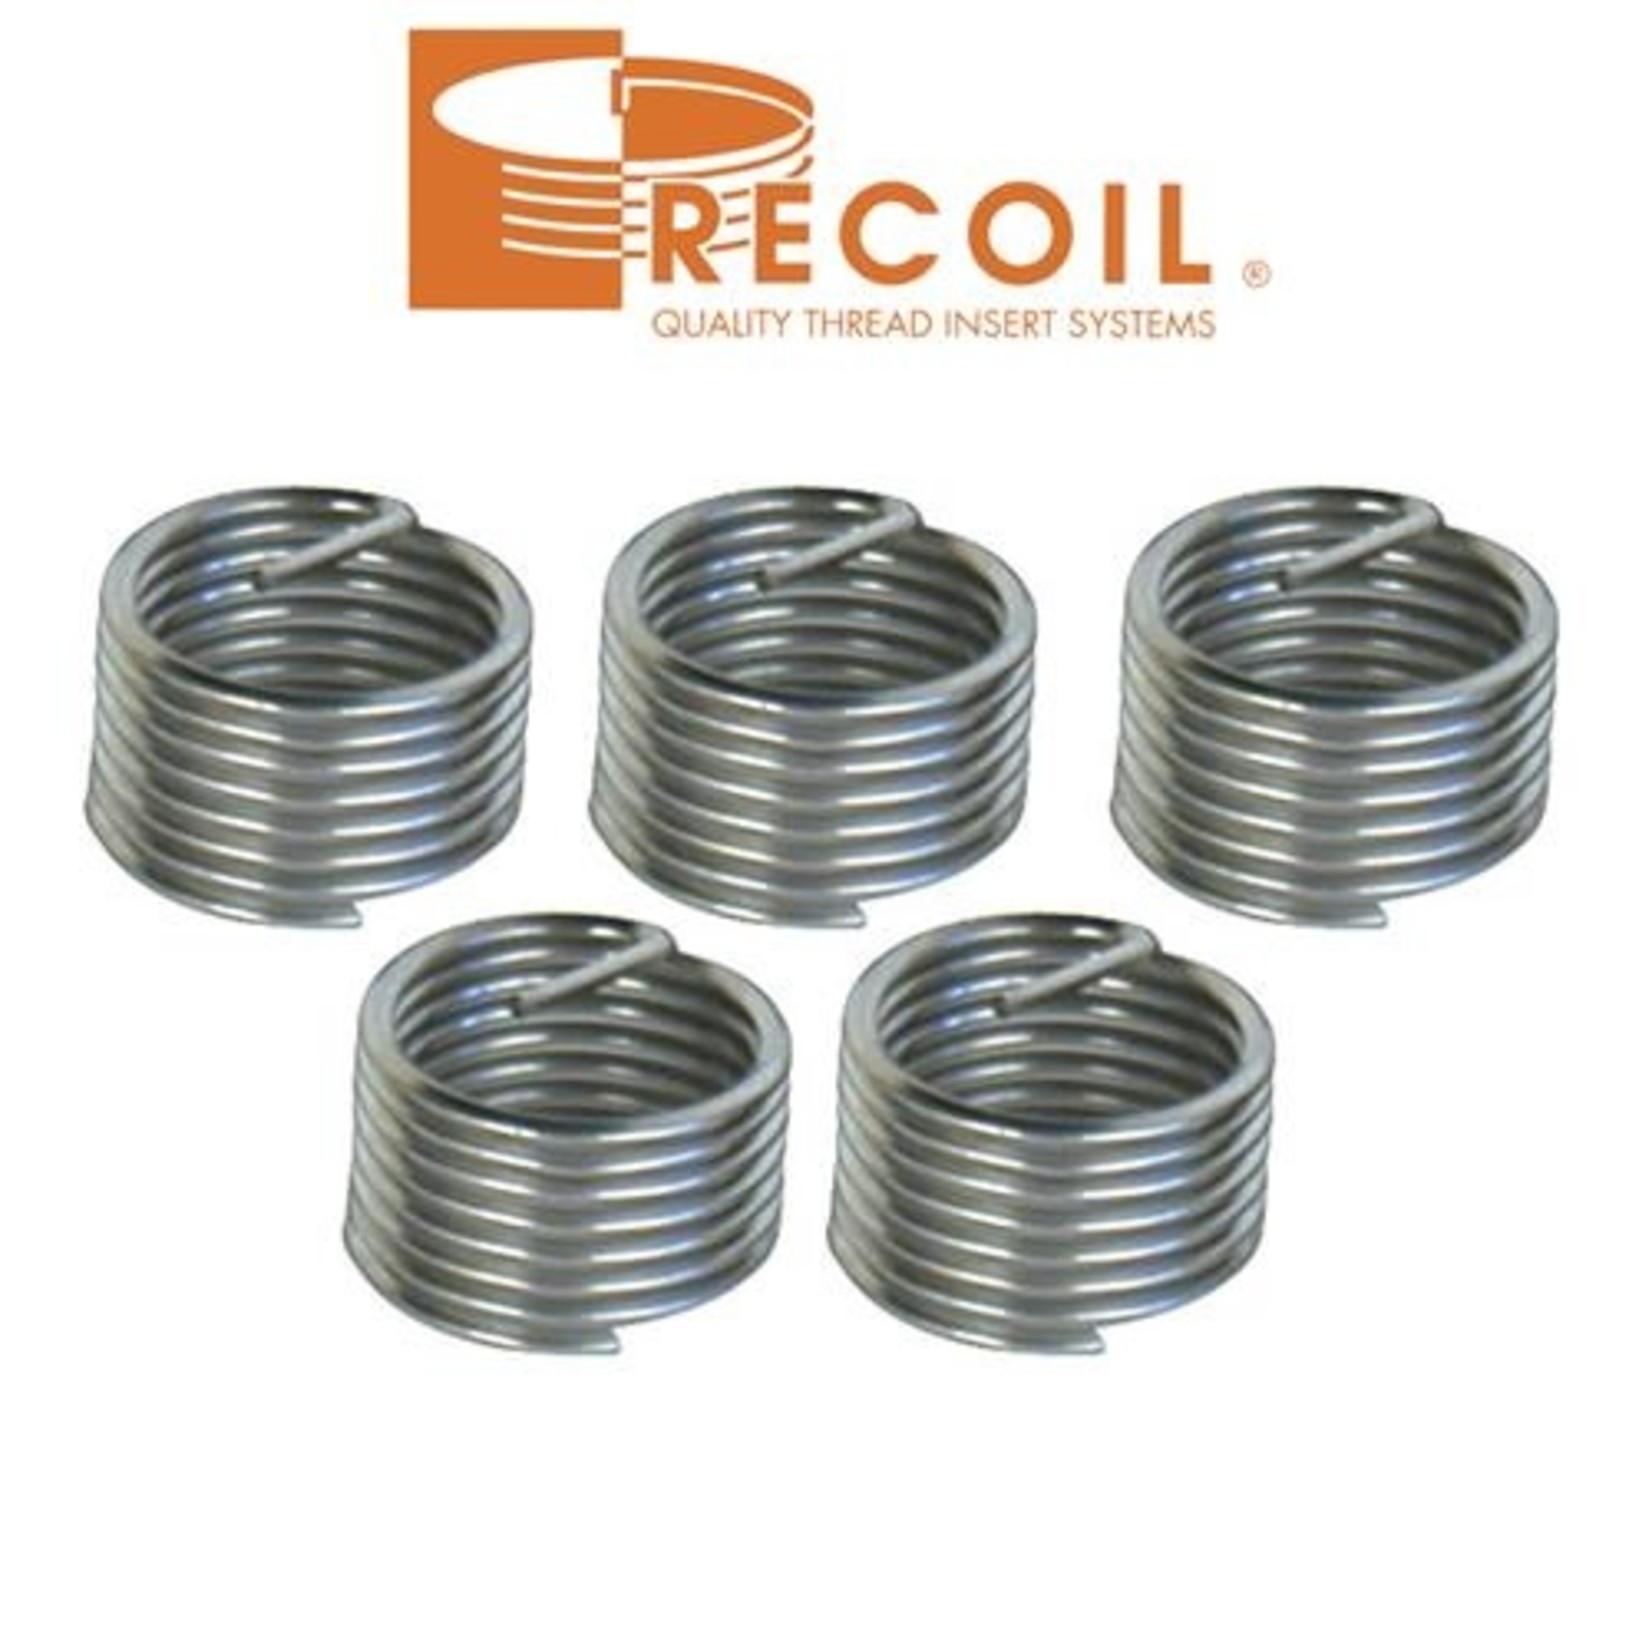 Bikecorp Recoil Thread Inserts For Cranks Left 5 Per Packet